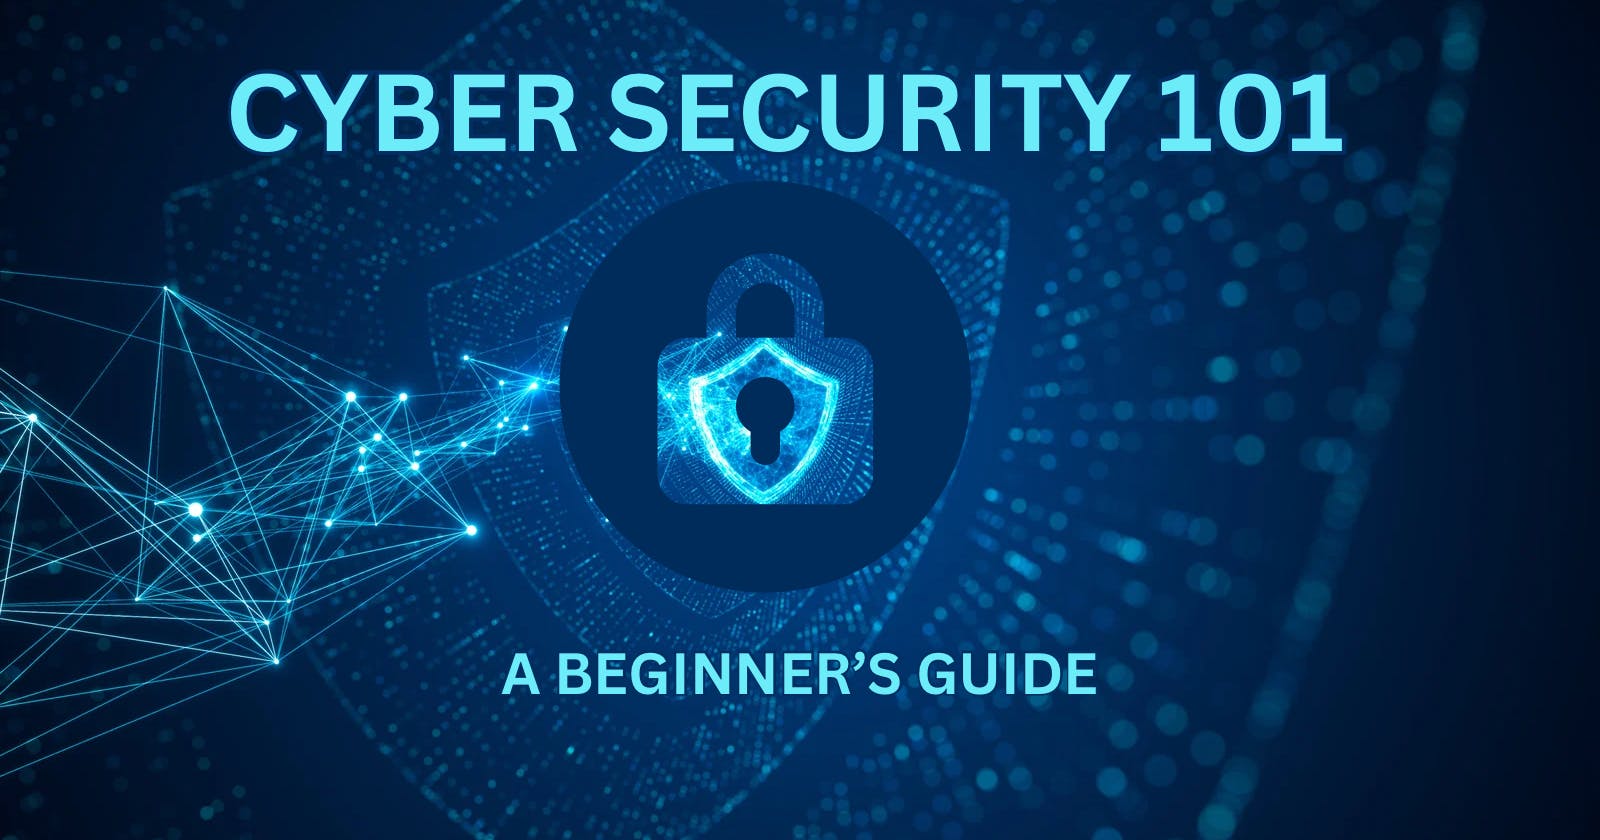 Cybersecurity 101: A Beginner's Guide to Learning about Cybersecurity